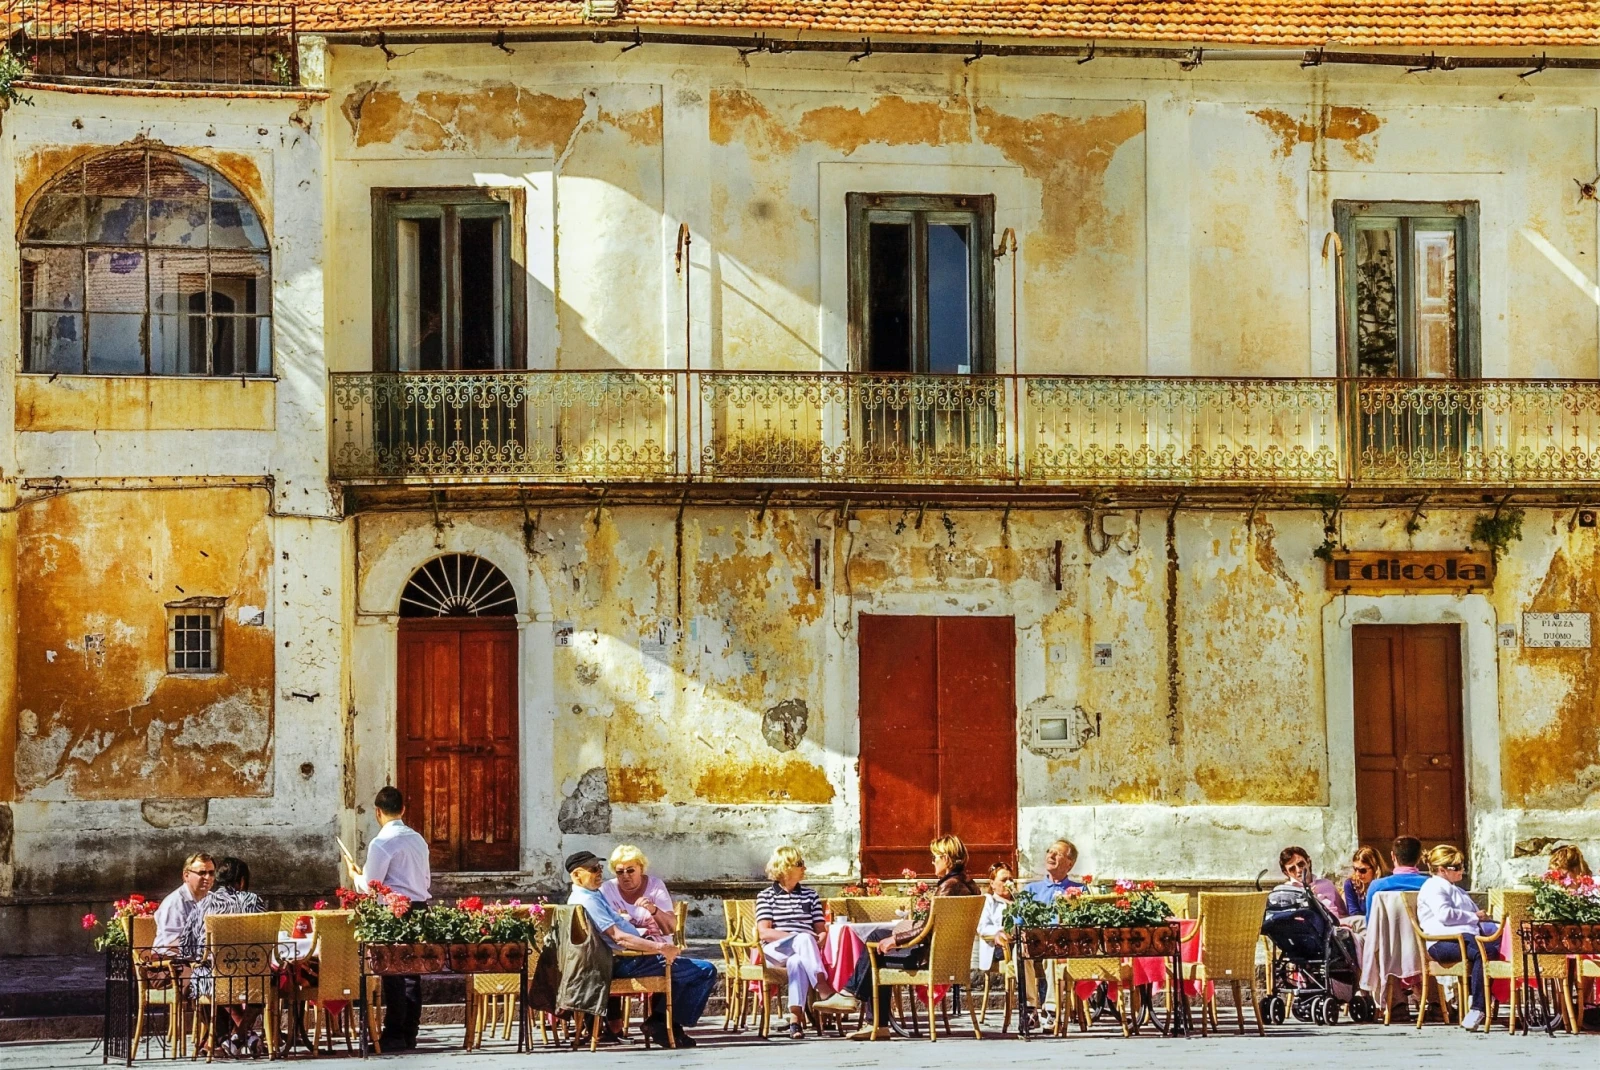 people sitting and chatting at a café in front of an old façade